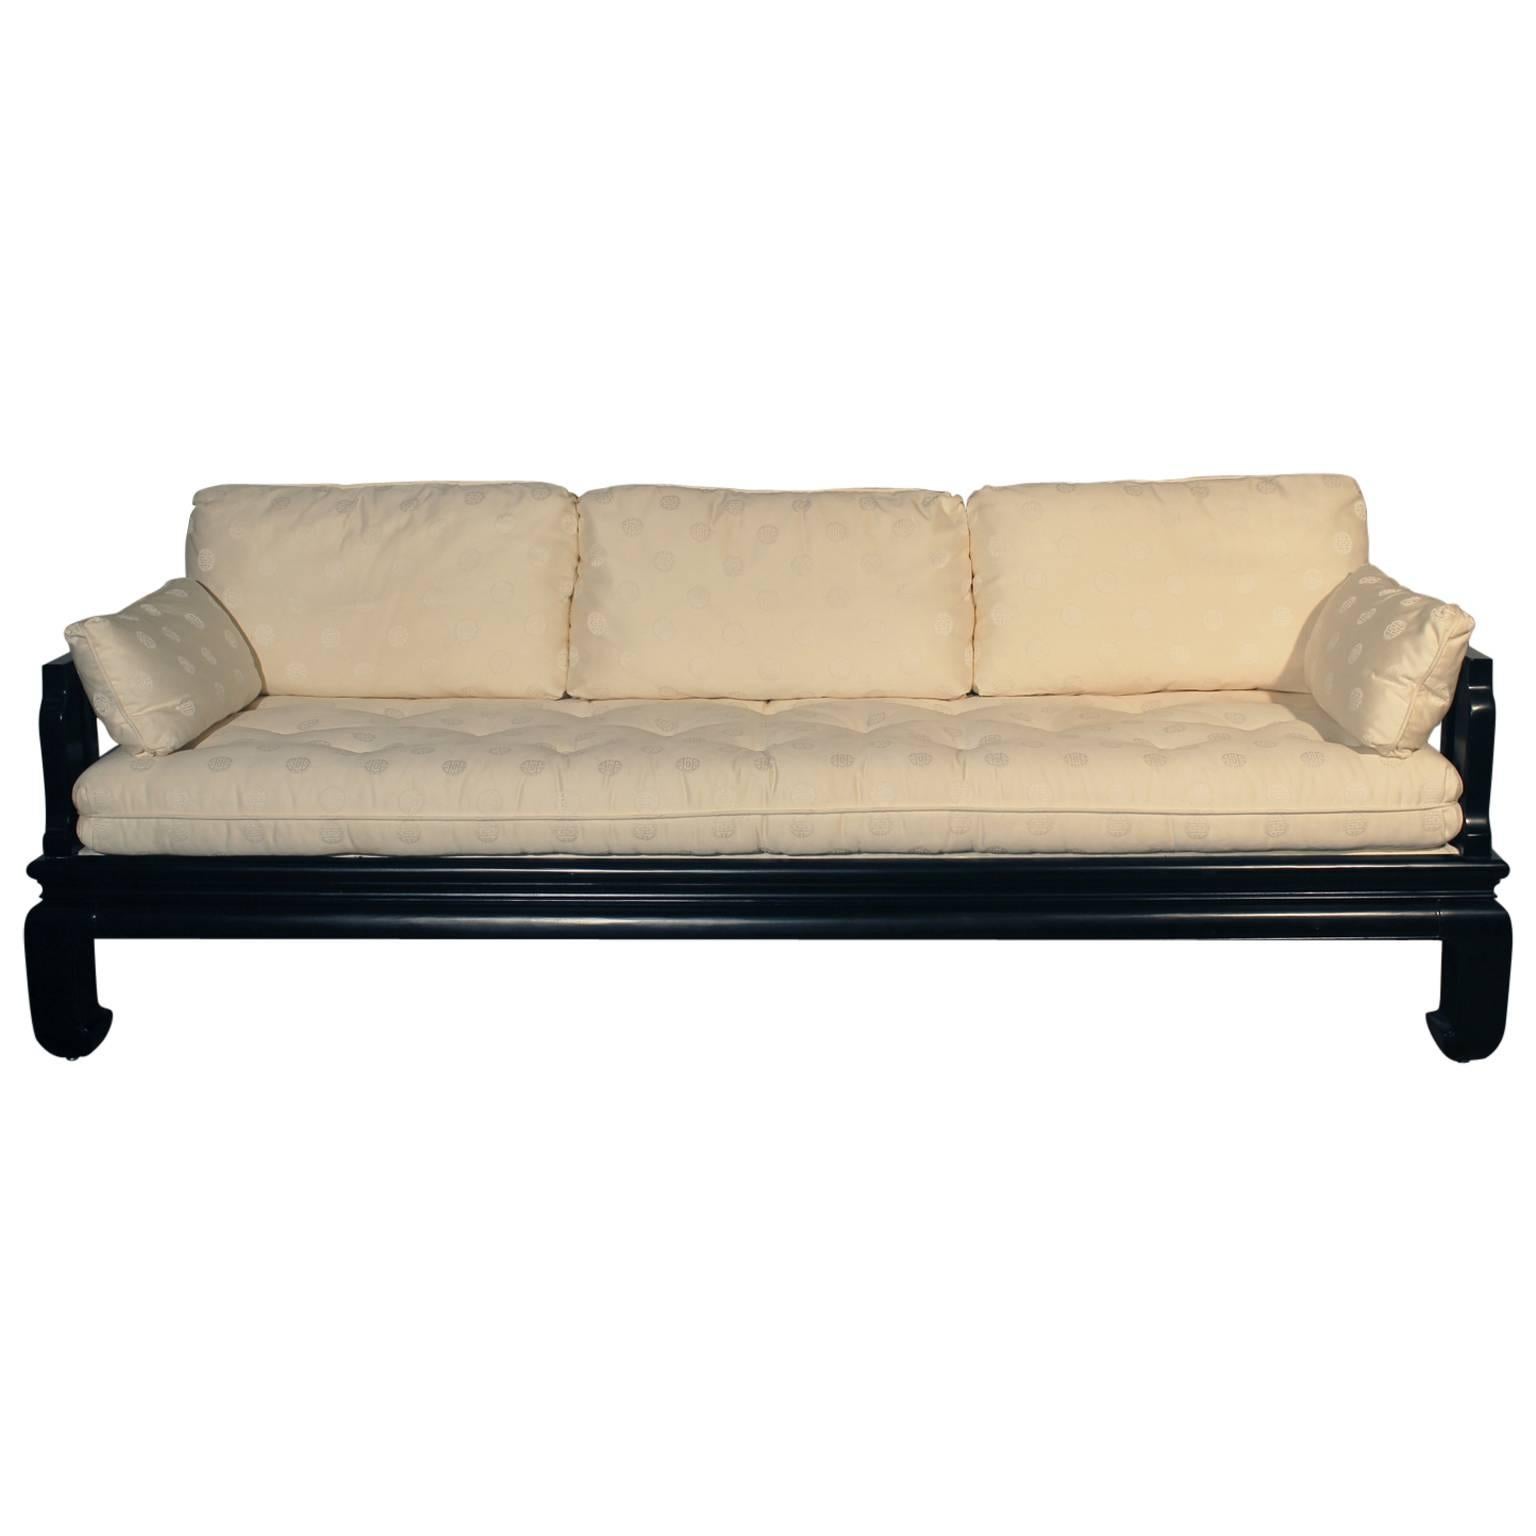 Black Lacquer Sofa Attributed to Michael Taylor for Baker